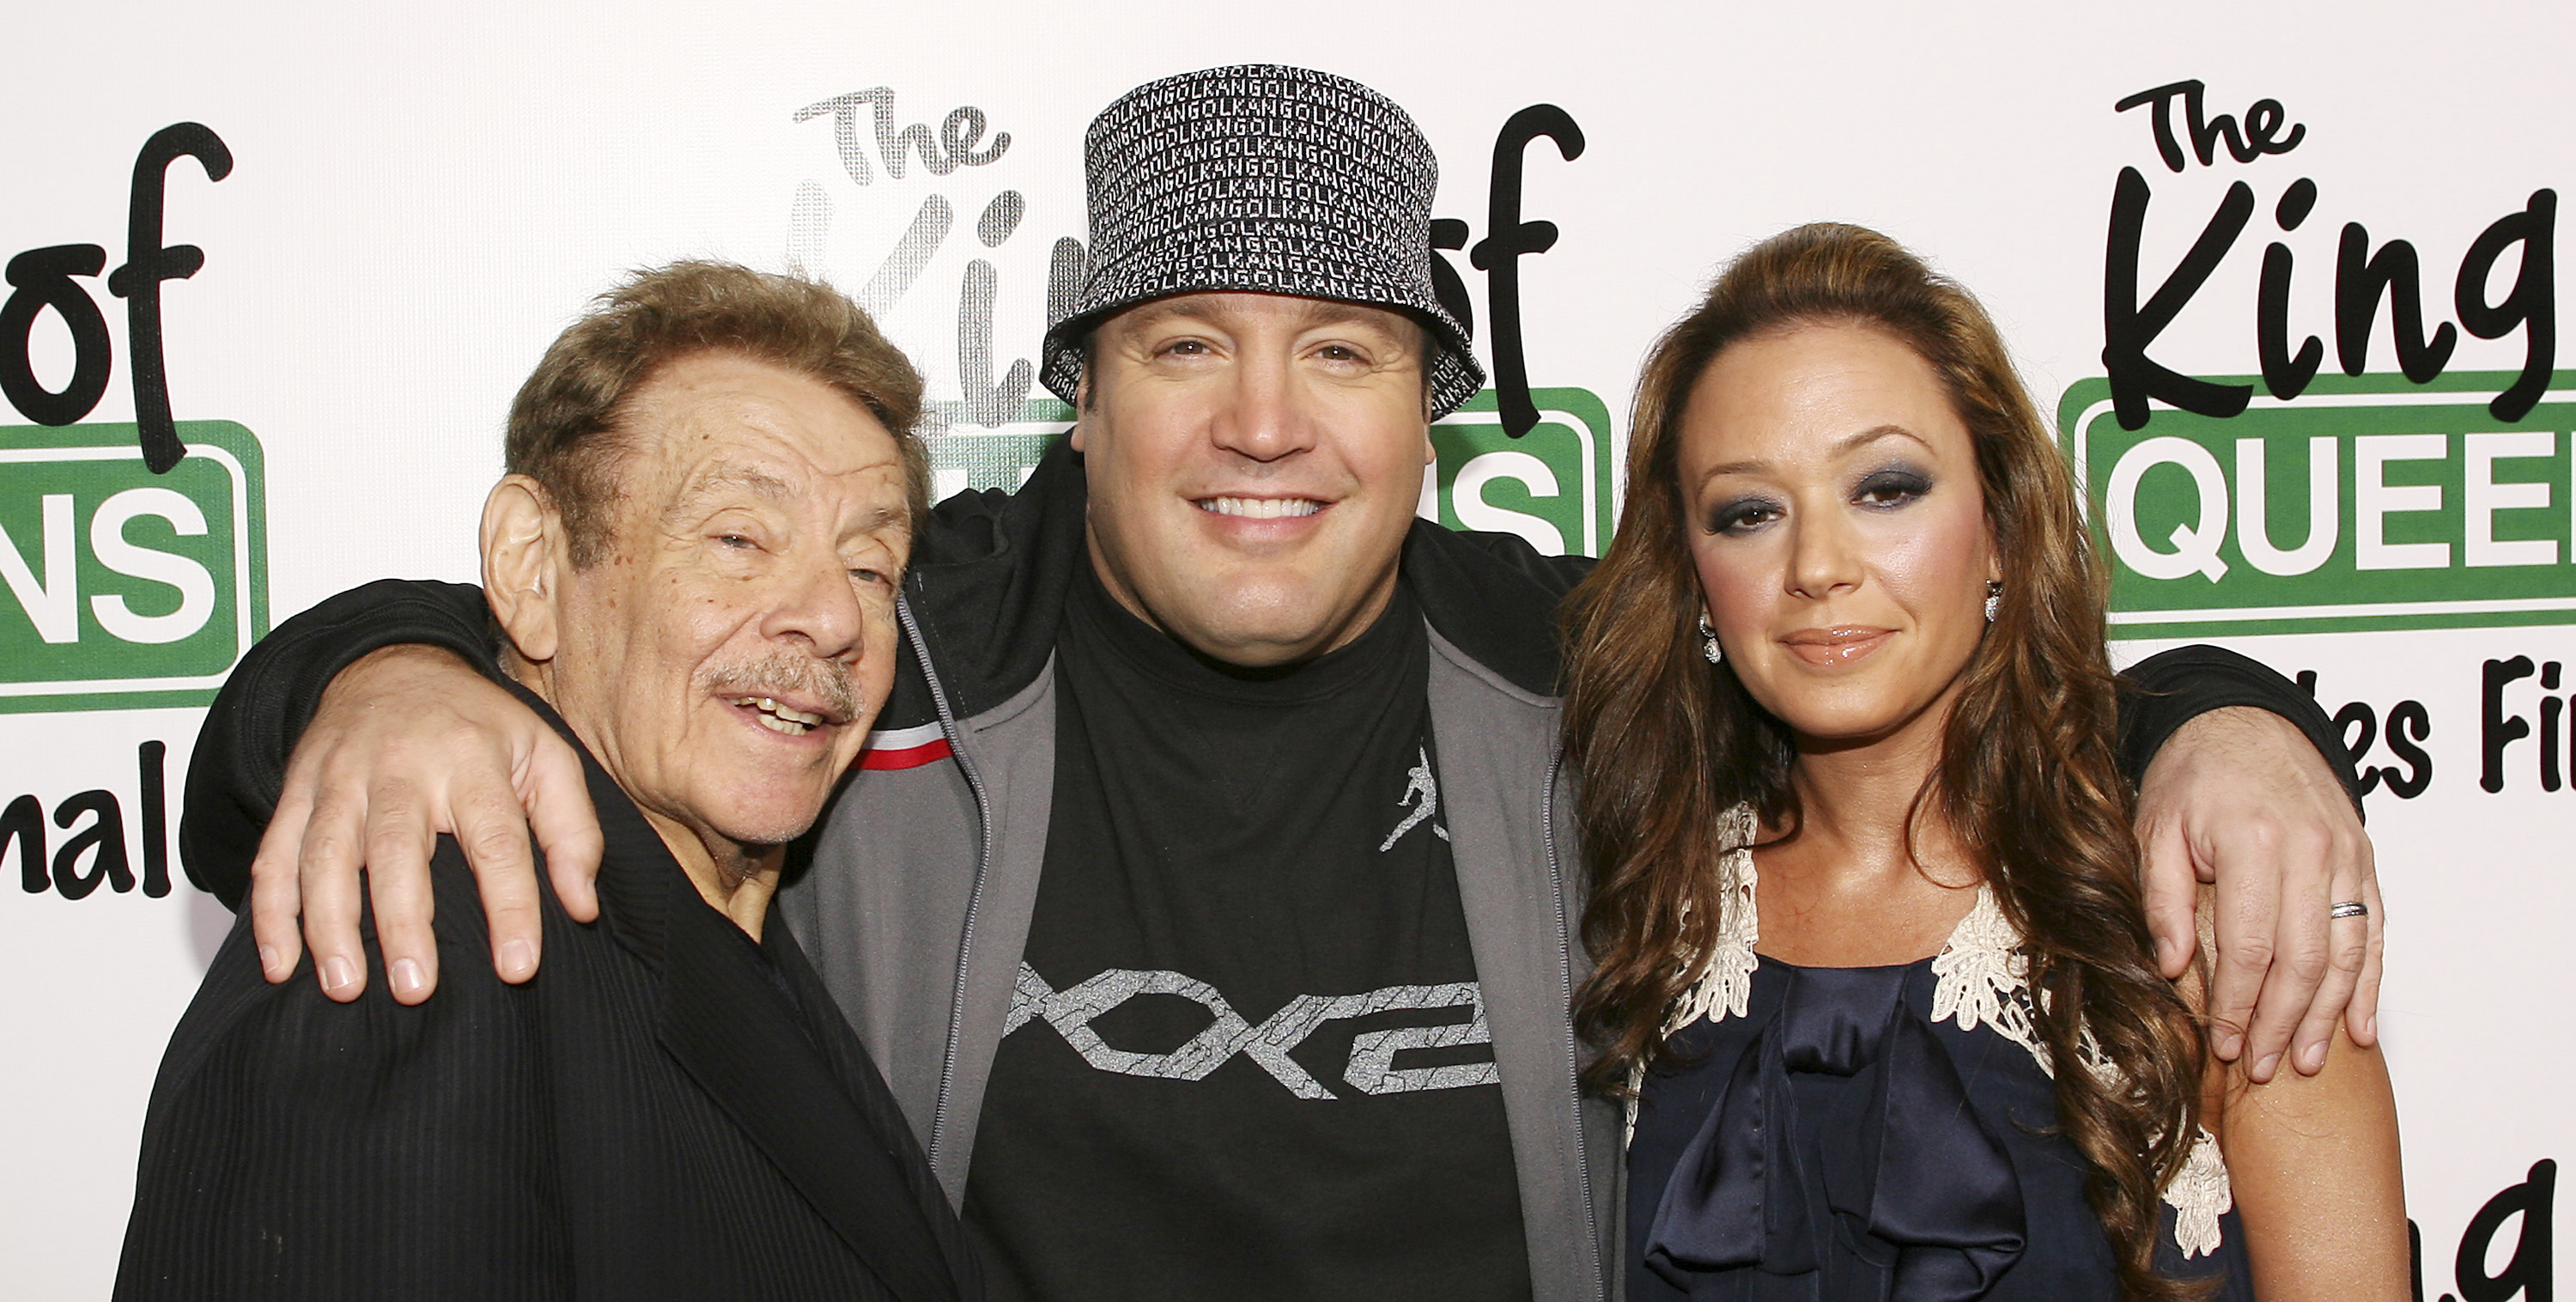 Jerry Stiller, Kevin James and Leah Remini attend ' The King of Queens' final season wrap party at Boulevard 3 on March 17, 2007